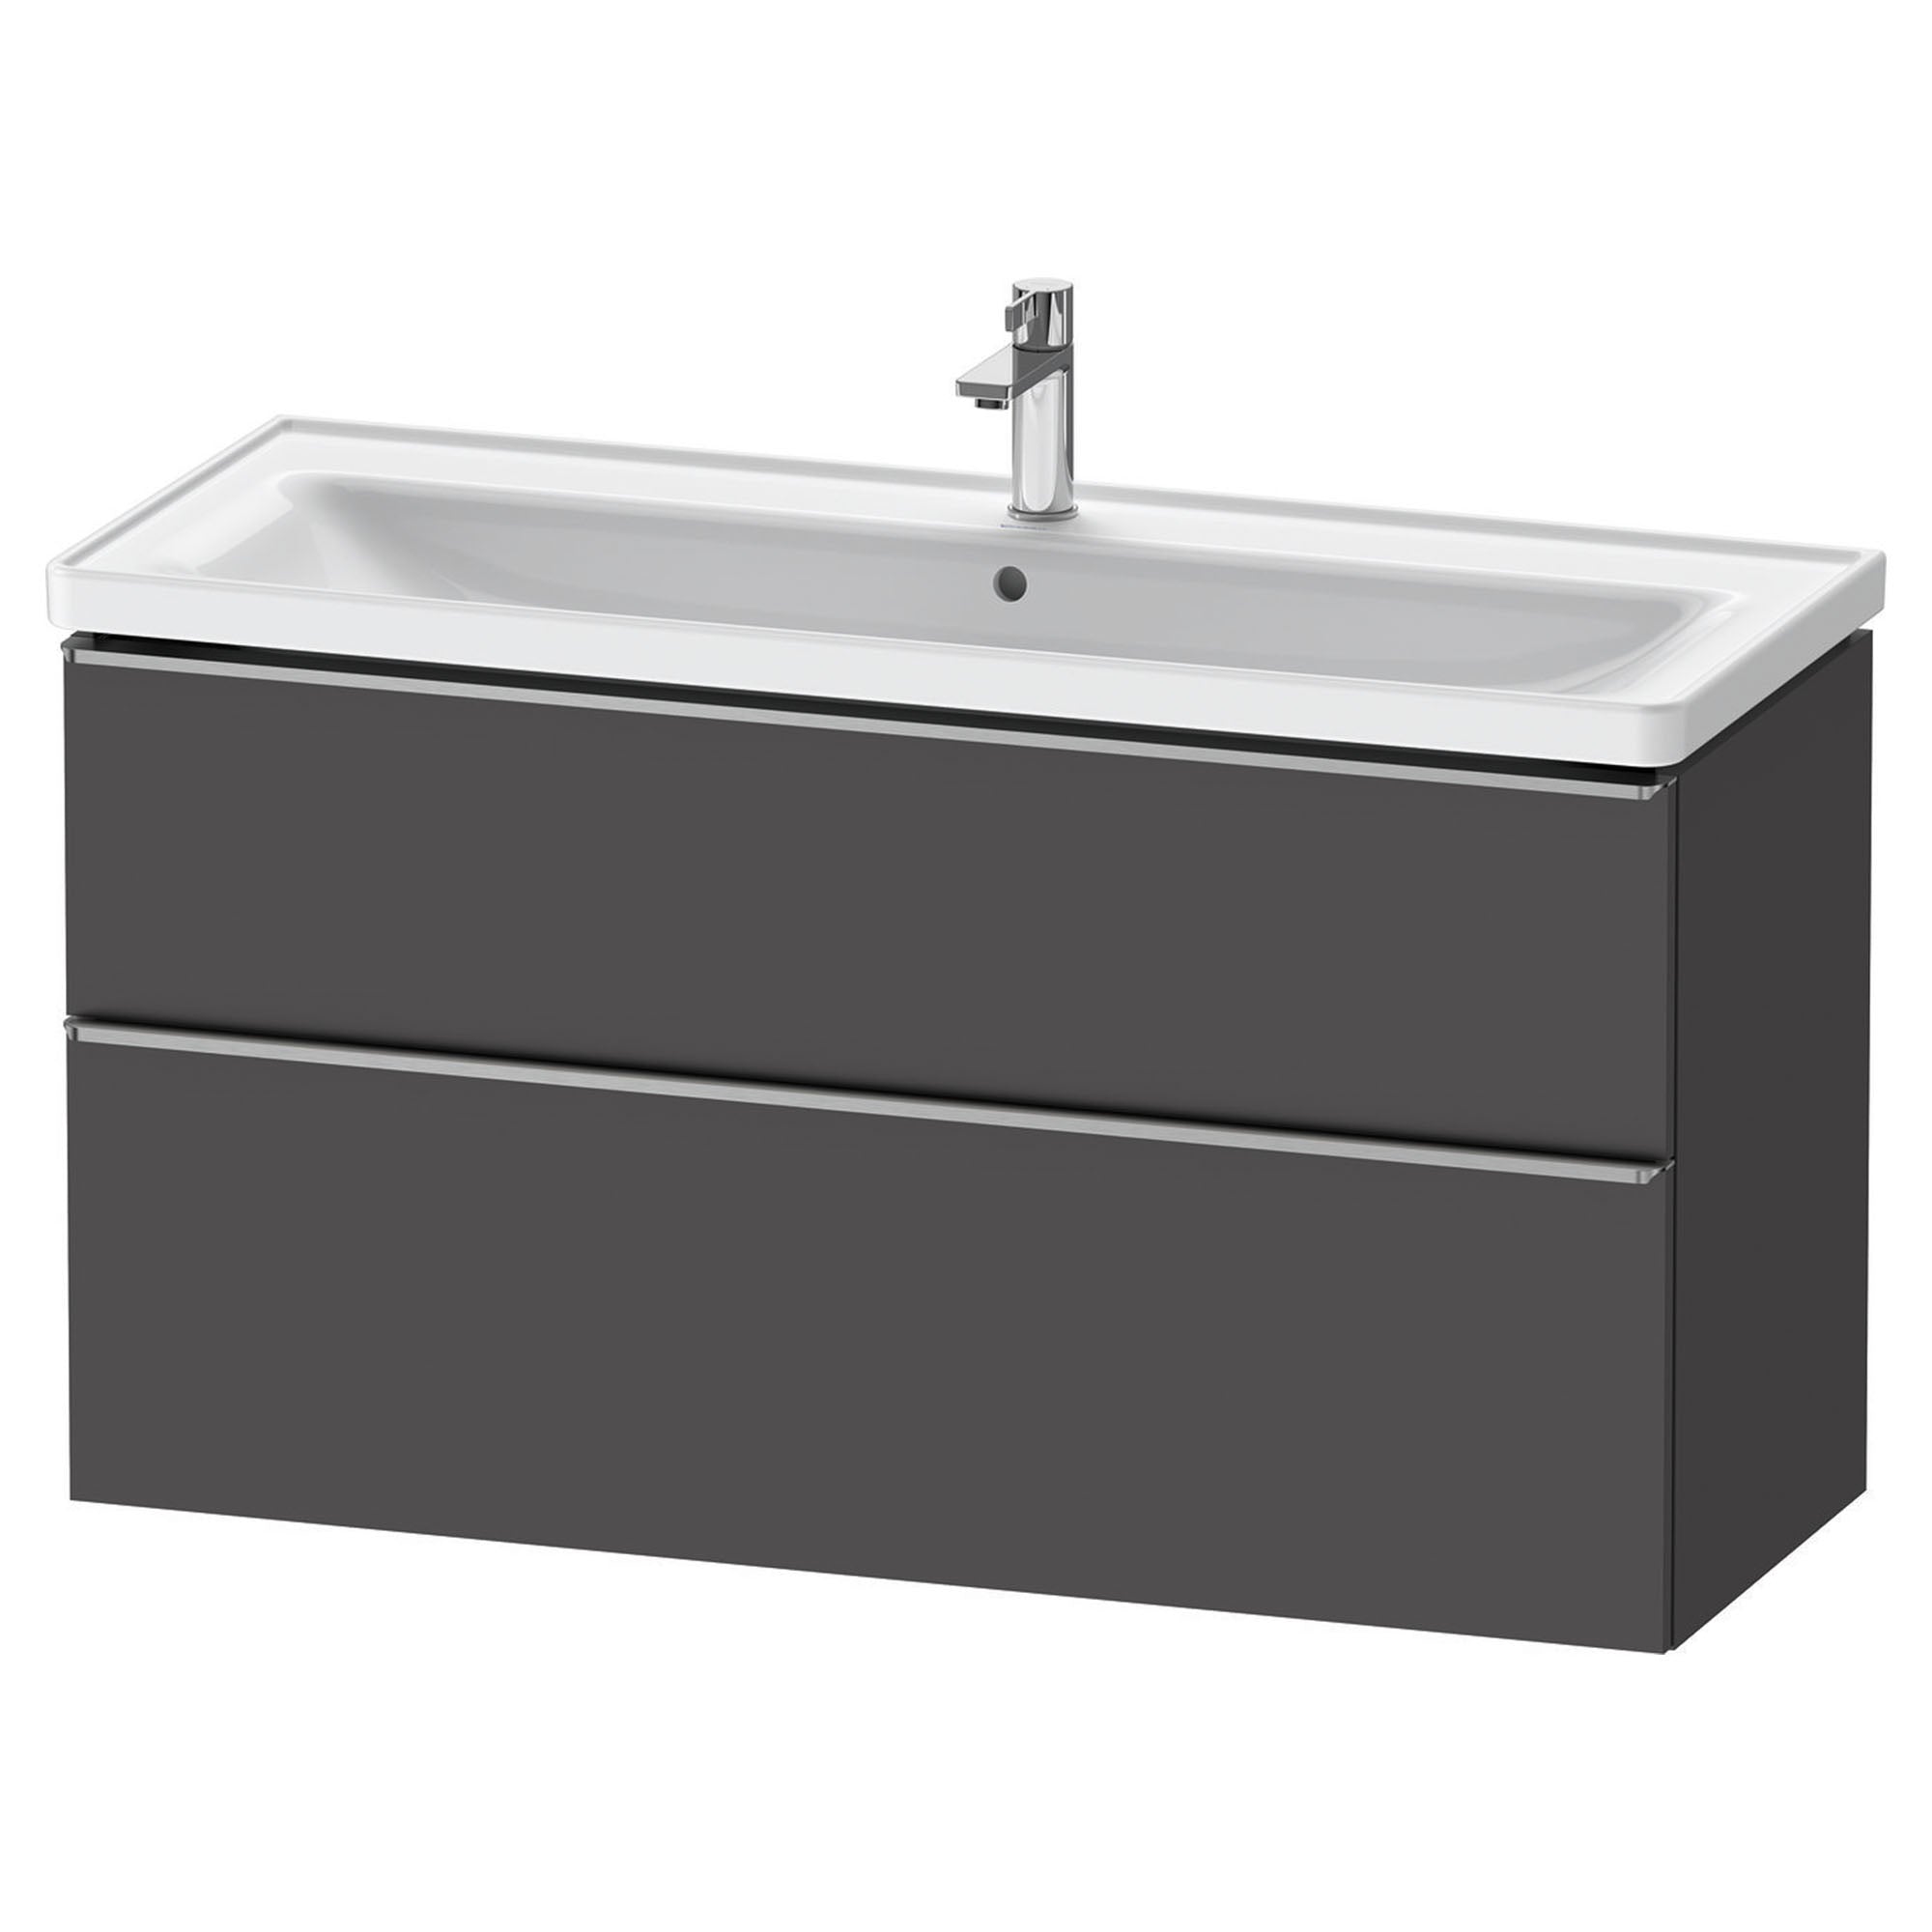 duravit d-neo 1200mm wall mounted vanity unit with d-neo basin matt graphite stainless steel handles